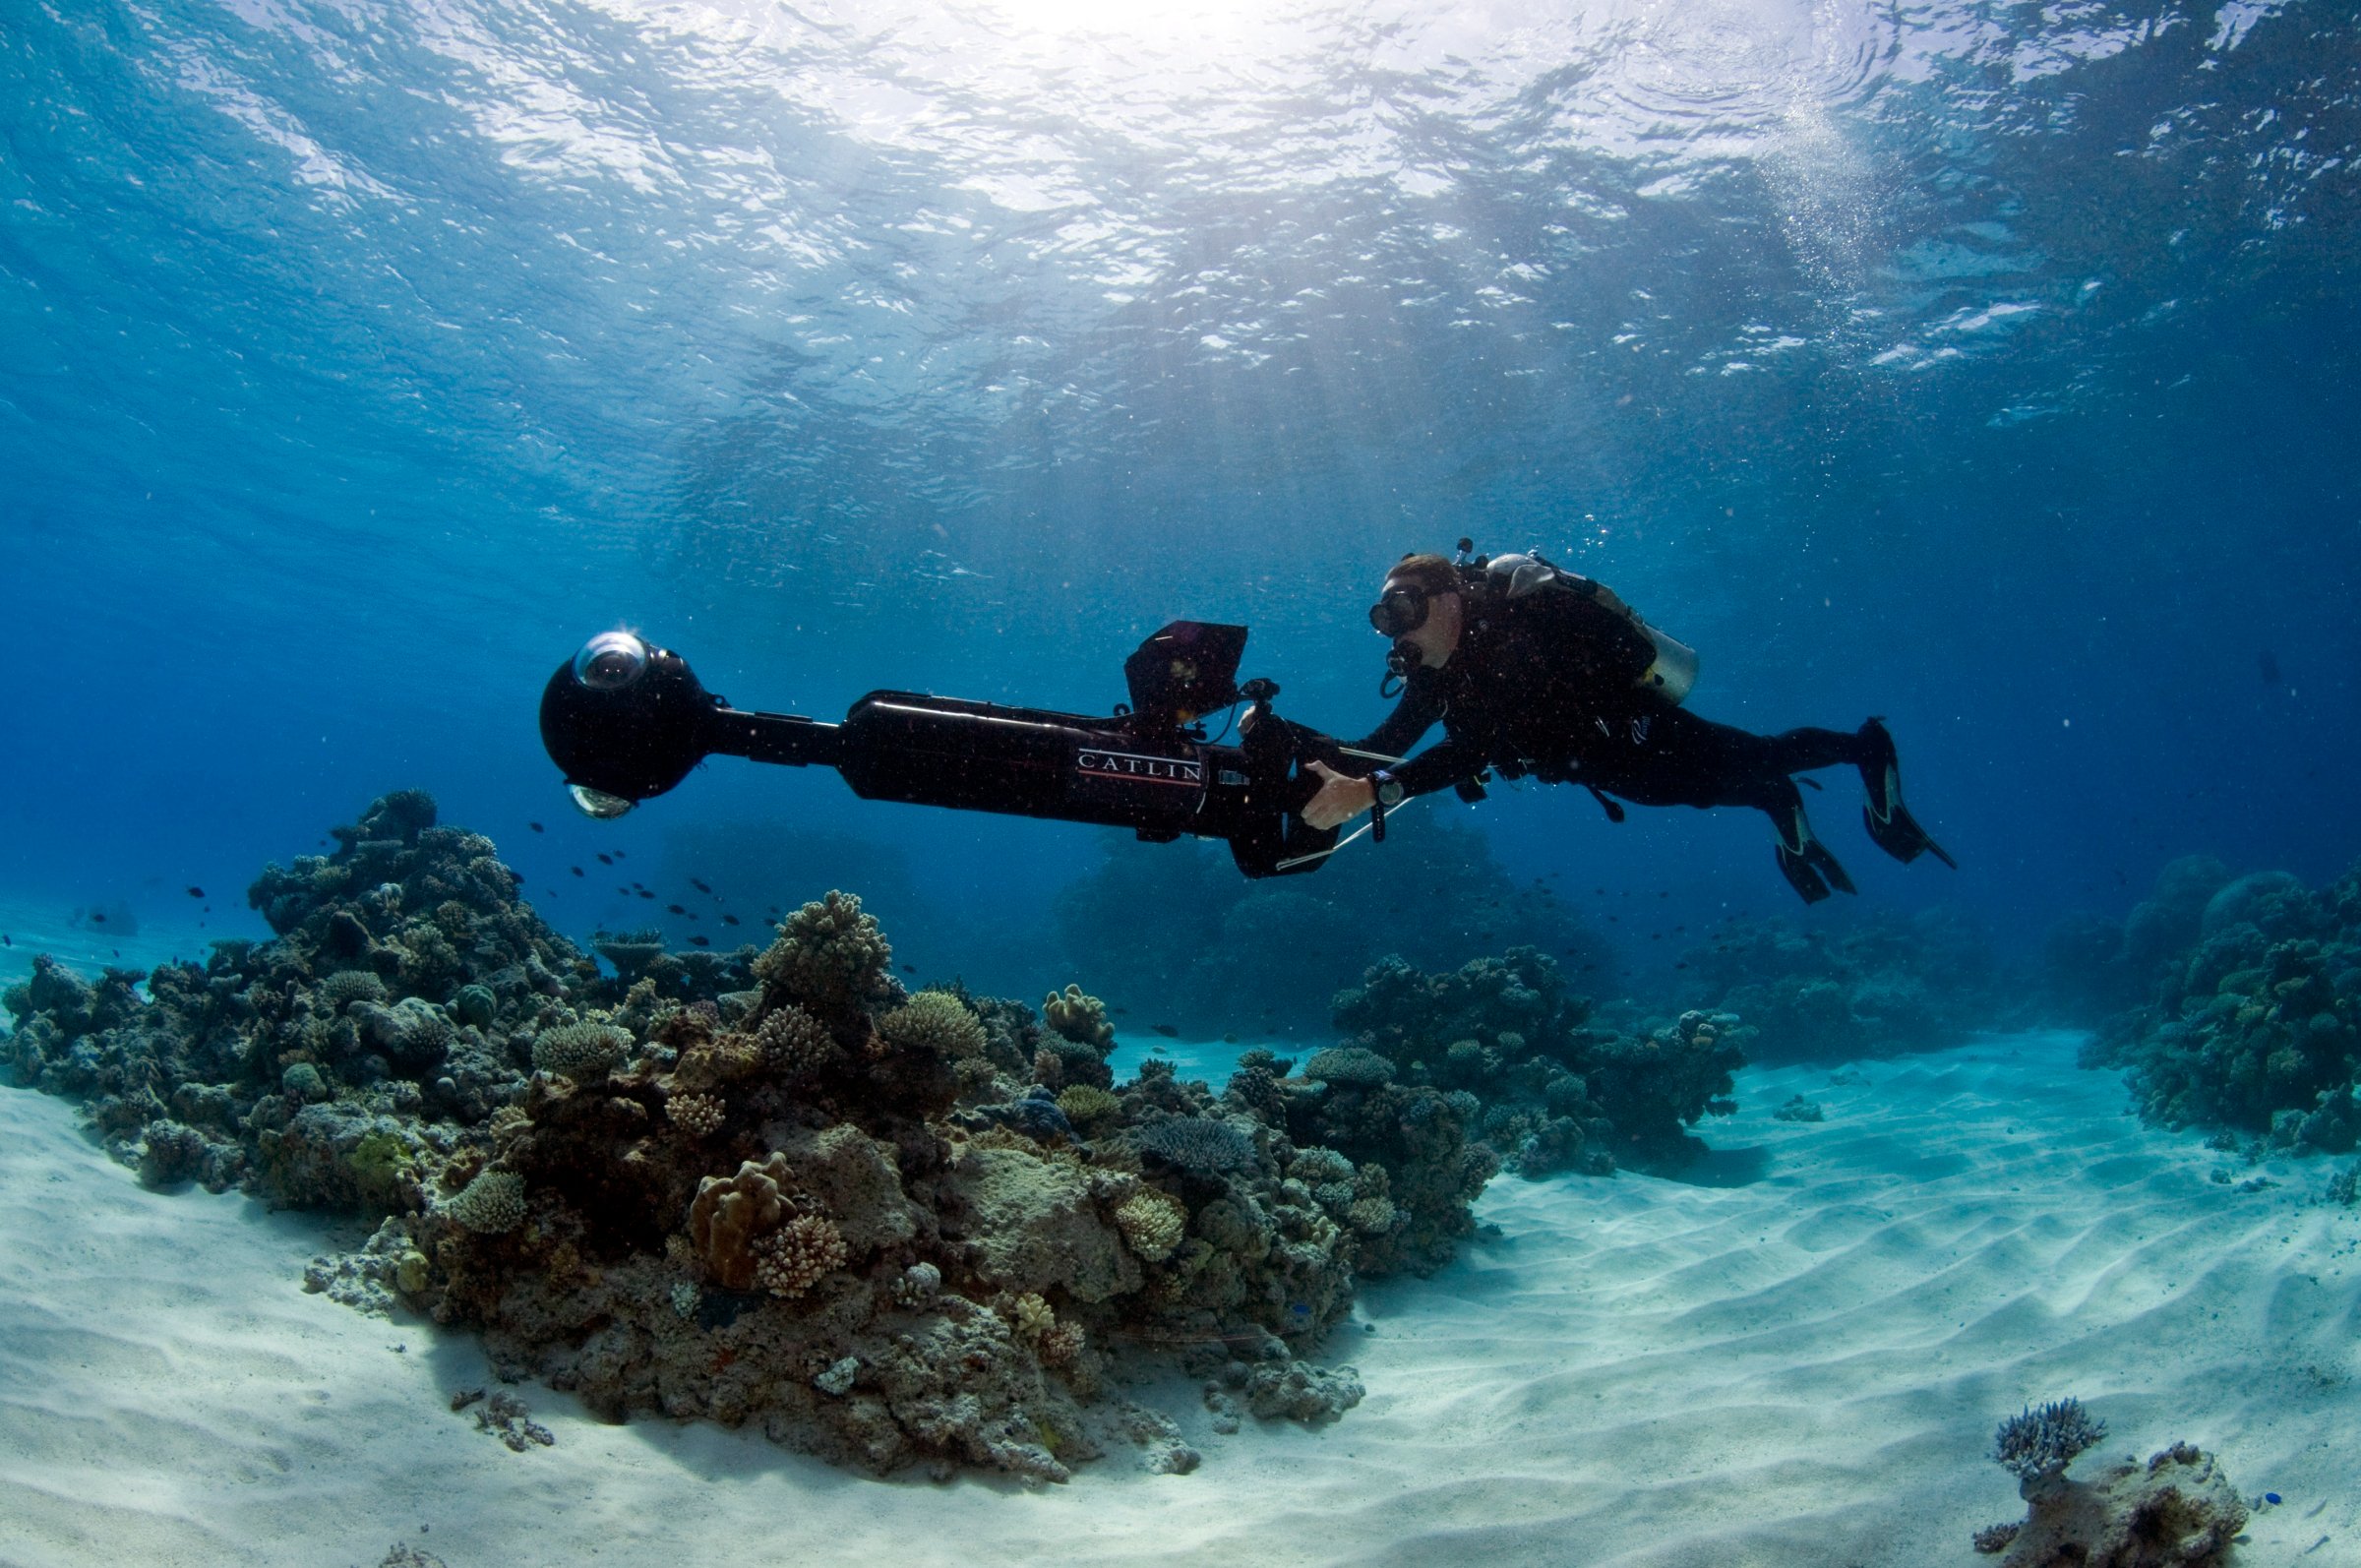 The SVII camera can take hundreds of photos of coral reefs, turning them into 360-degree panoramas